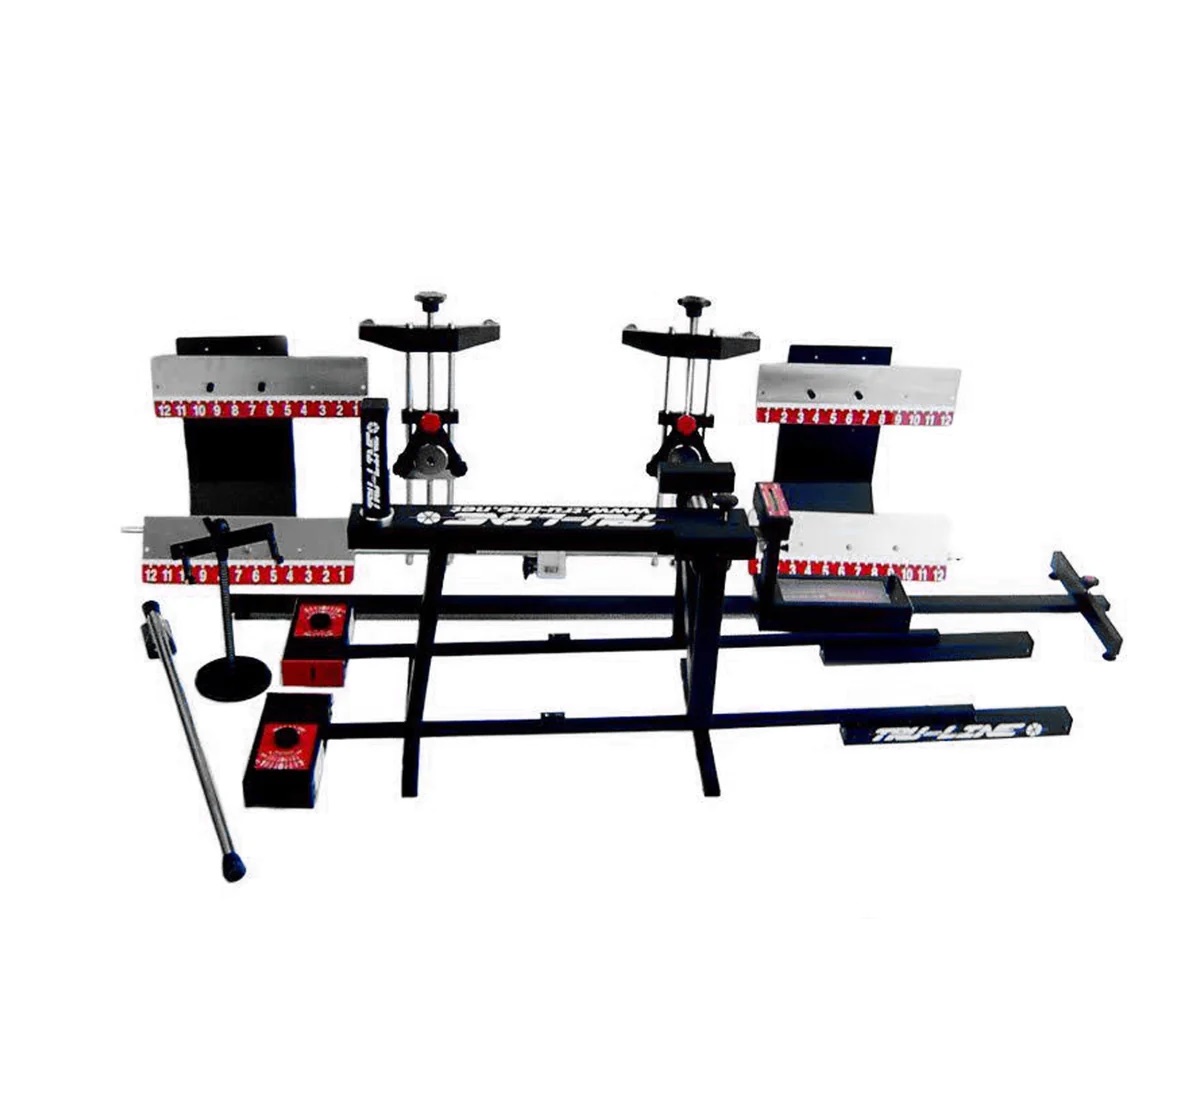 Wheel Alignment Systems